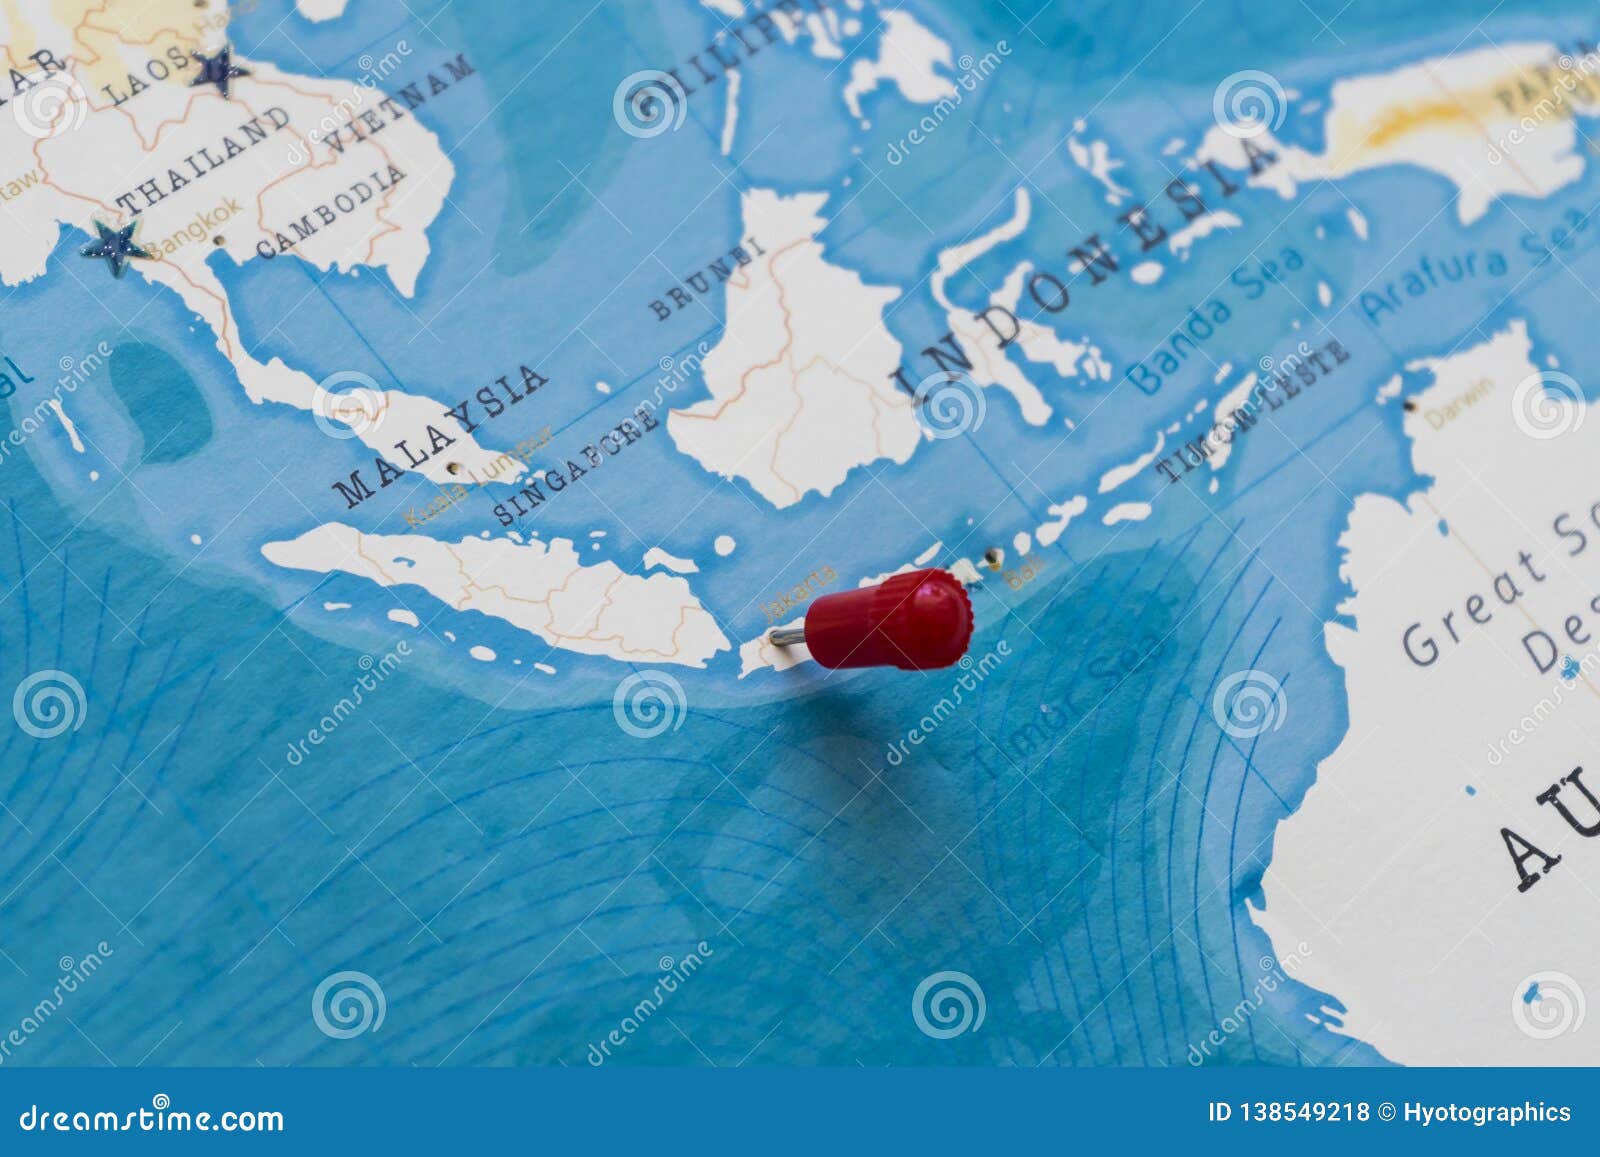 A Pin On Jakarta  Indonesia In The World Map Stock Photo 